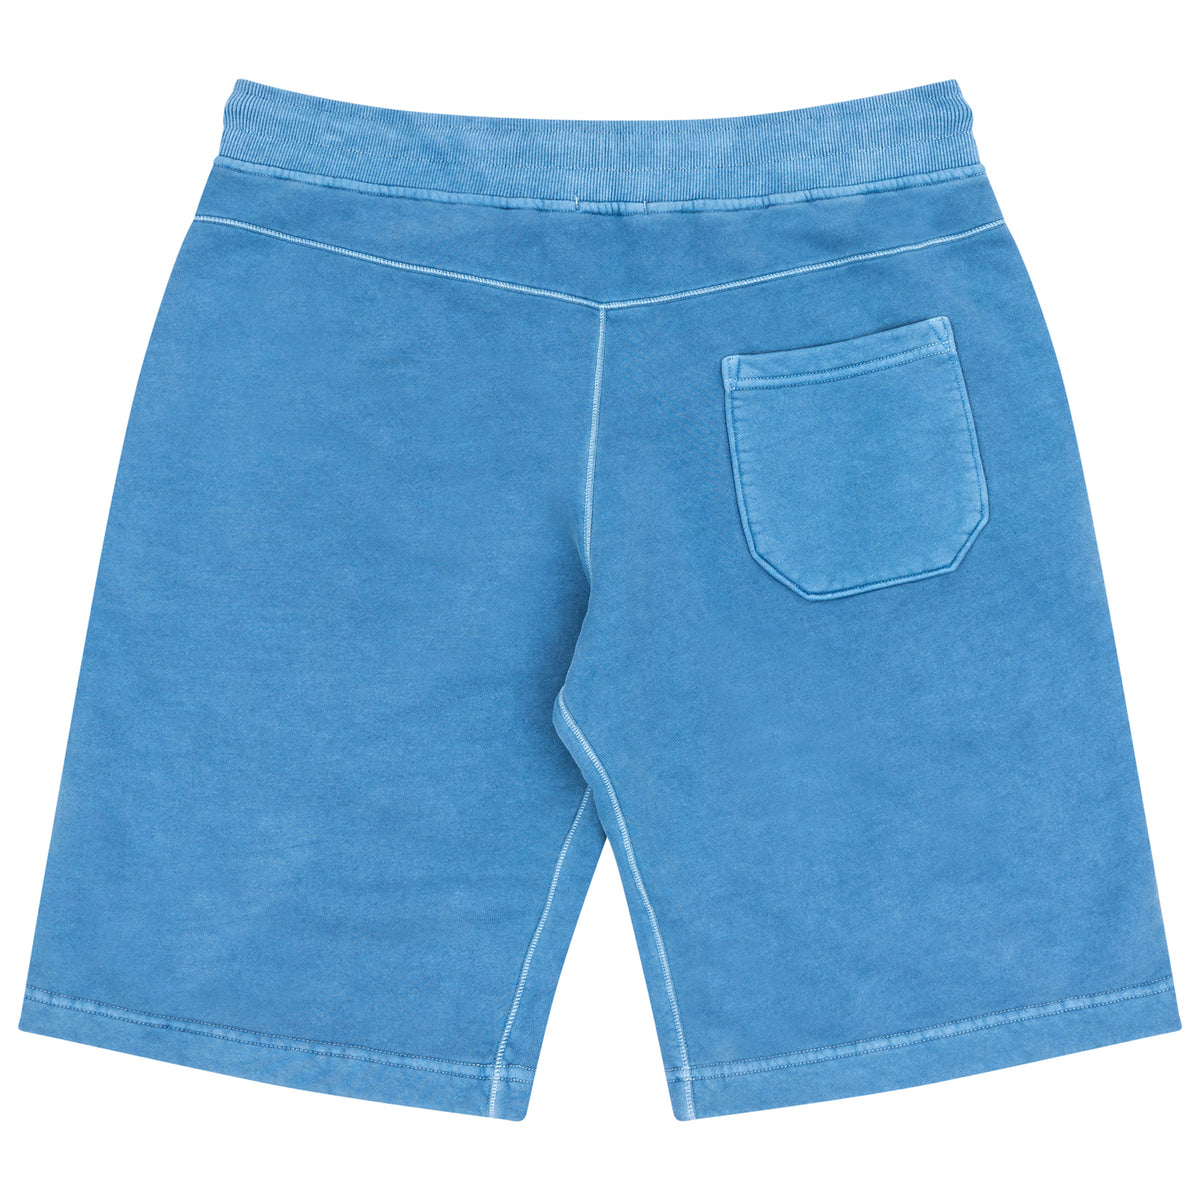 Load image into Gallery viewer, C.P. Company Infinity Blue Emerized Diagonal Fleece Shorts
